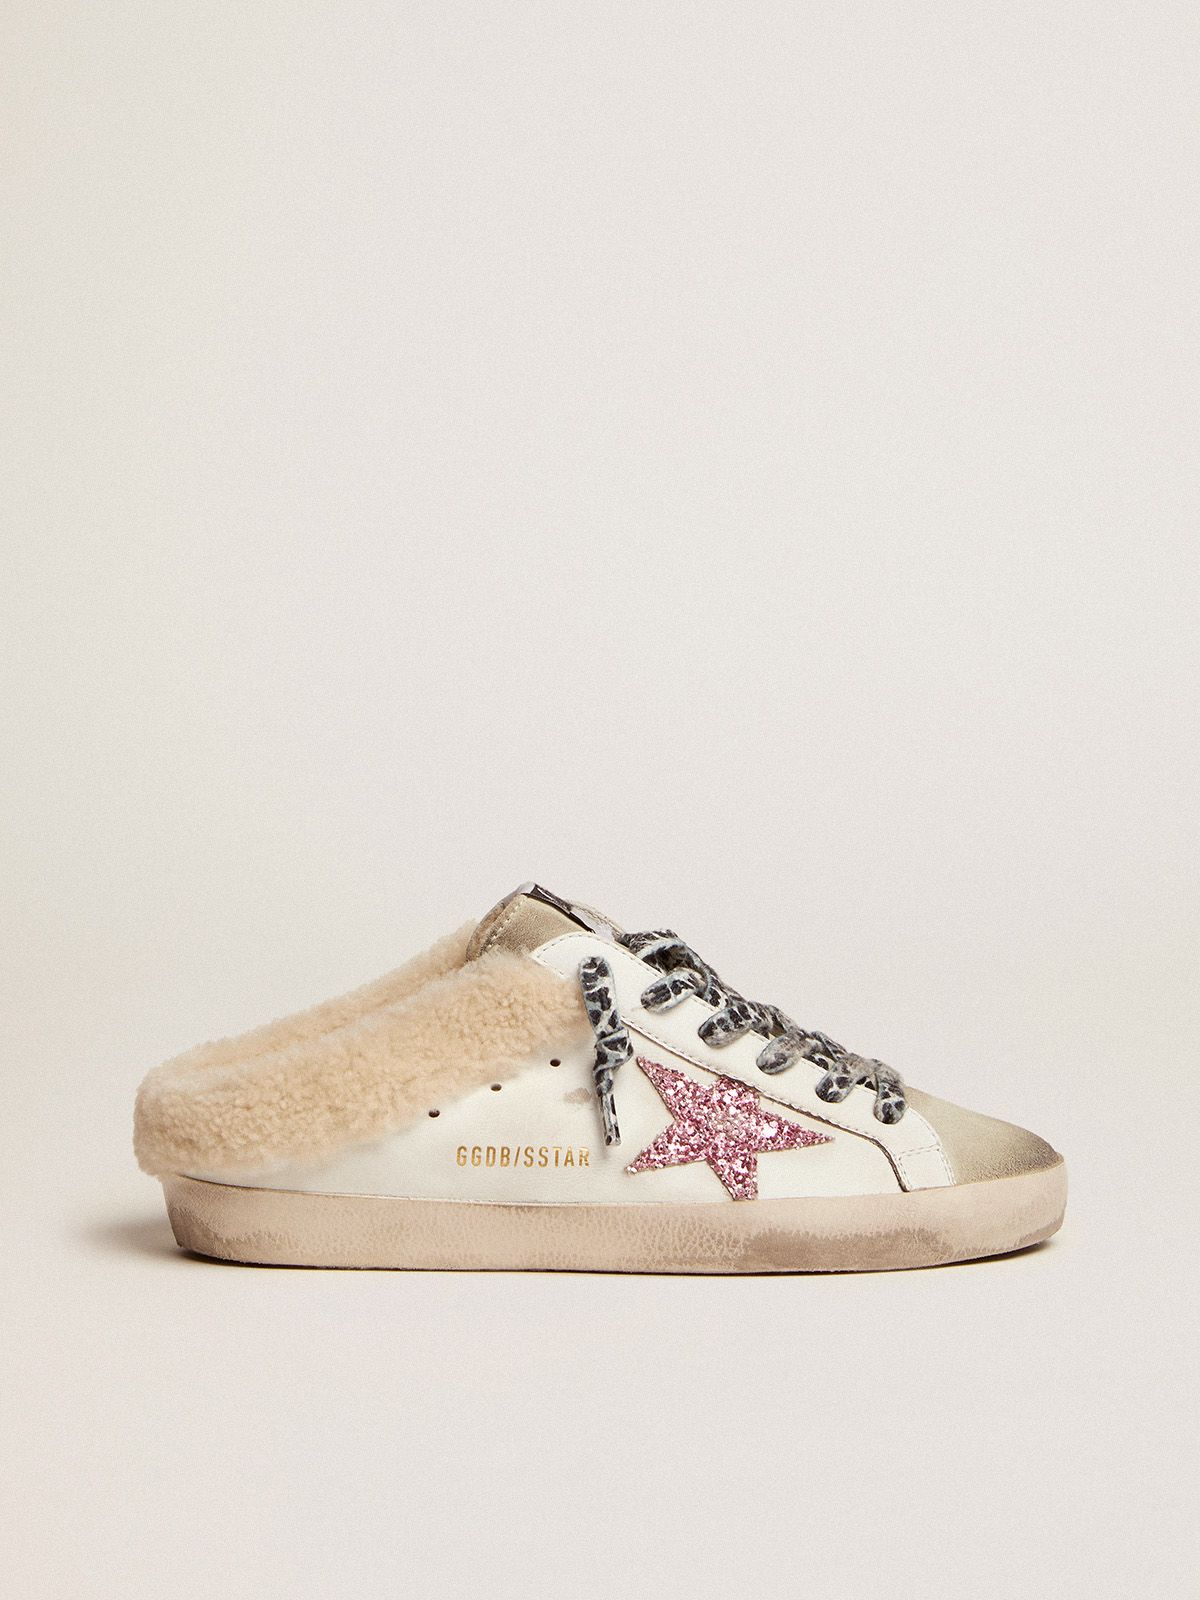 golden goose with shearling star pink Sabots lining Super-Star and glitter